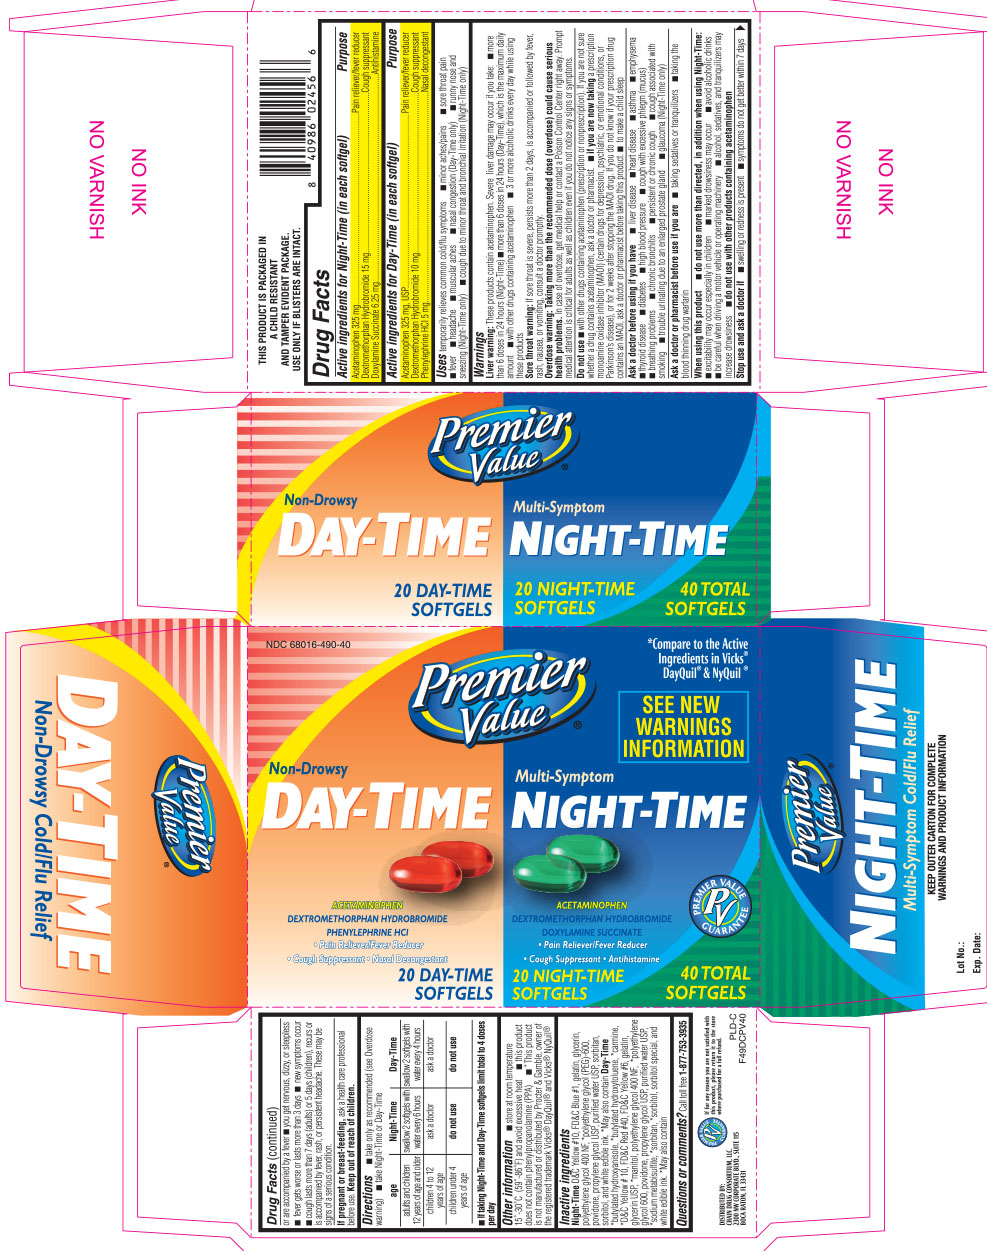 Premier value day-time night-time softgels 40 count